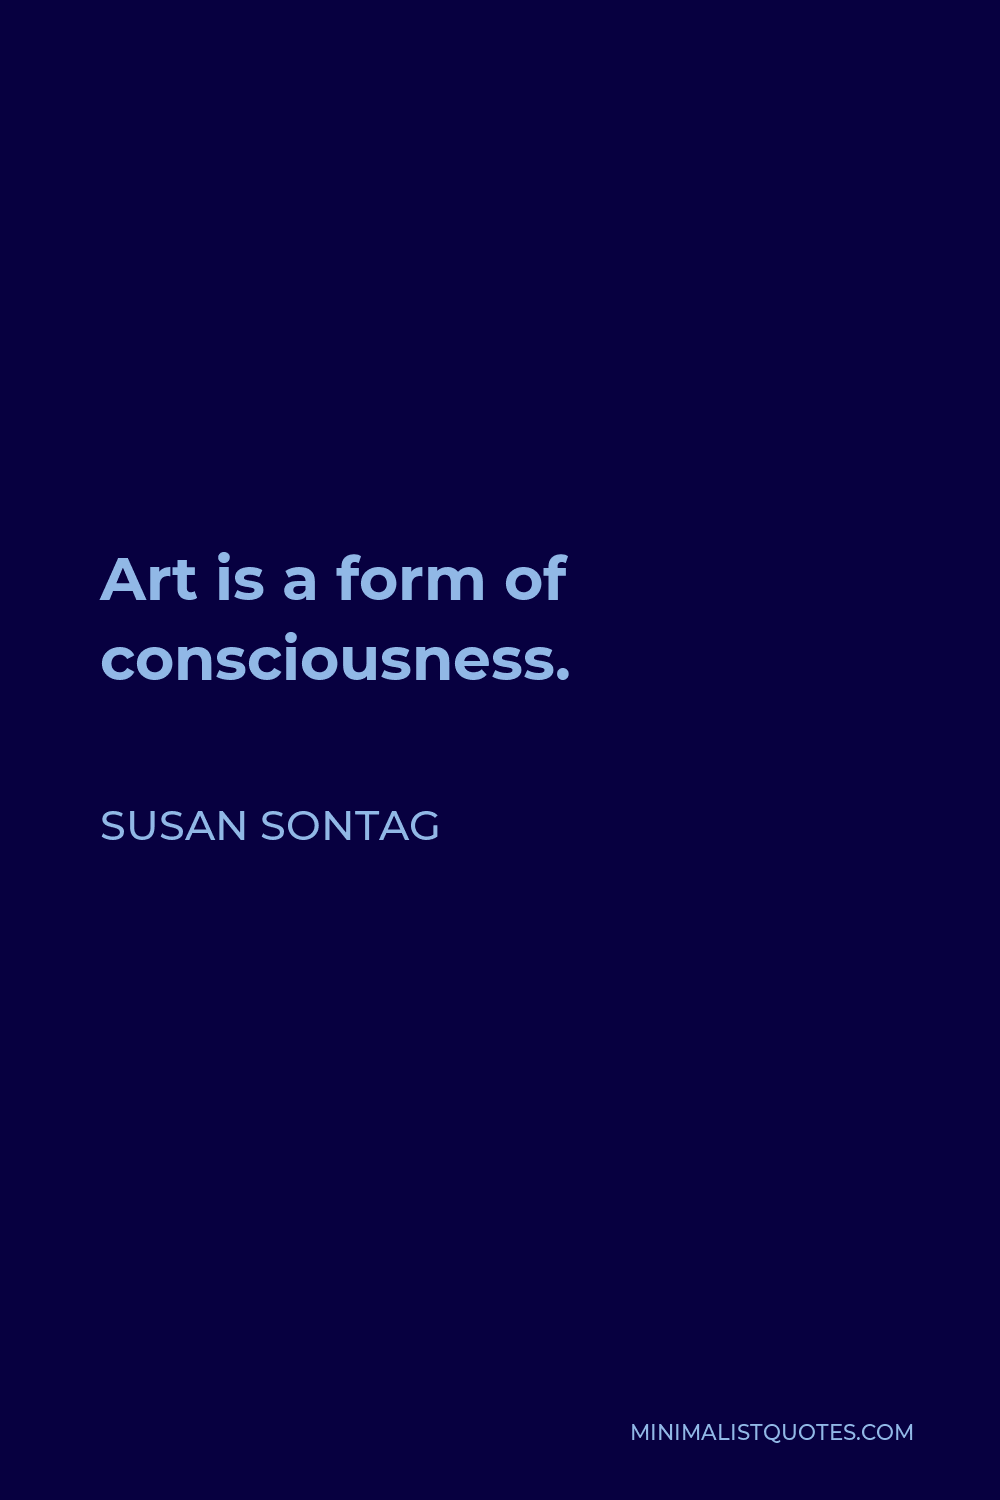 Susan Sontag Quote - Art is a form of consciousness.